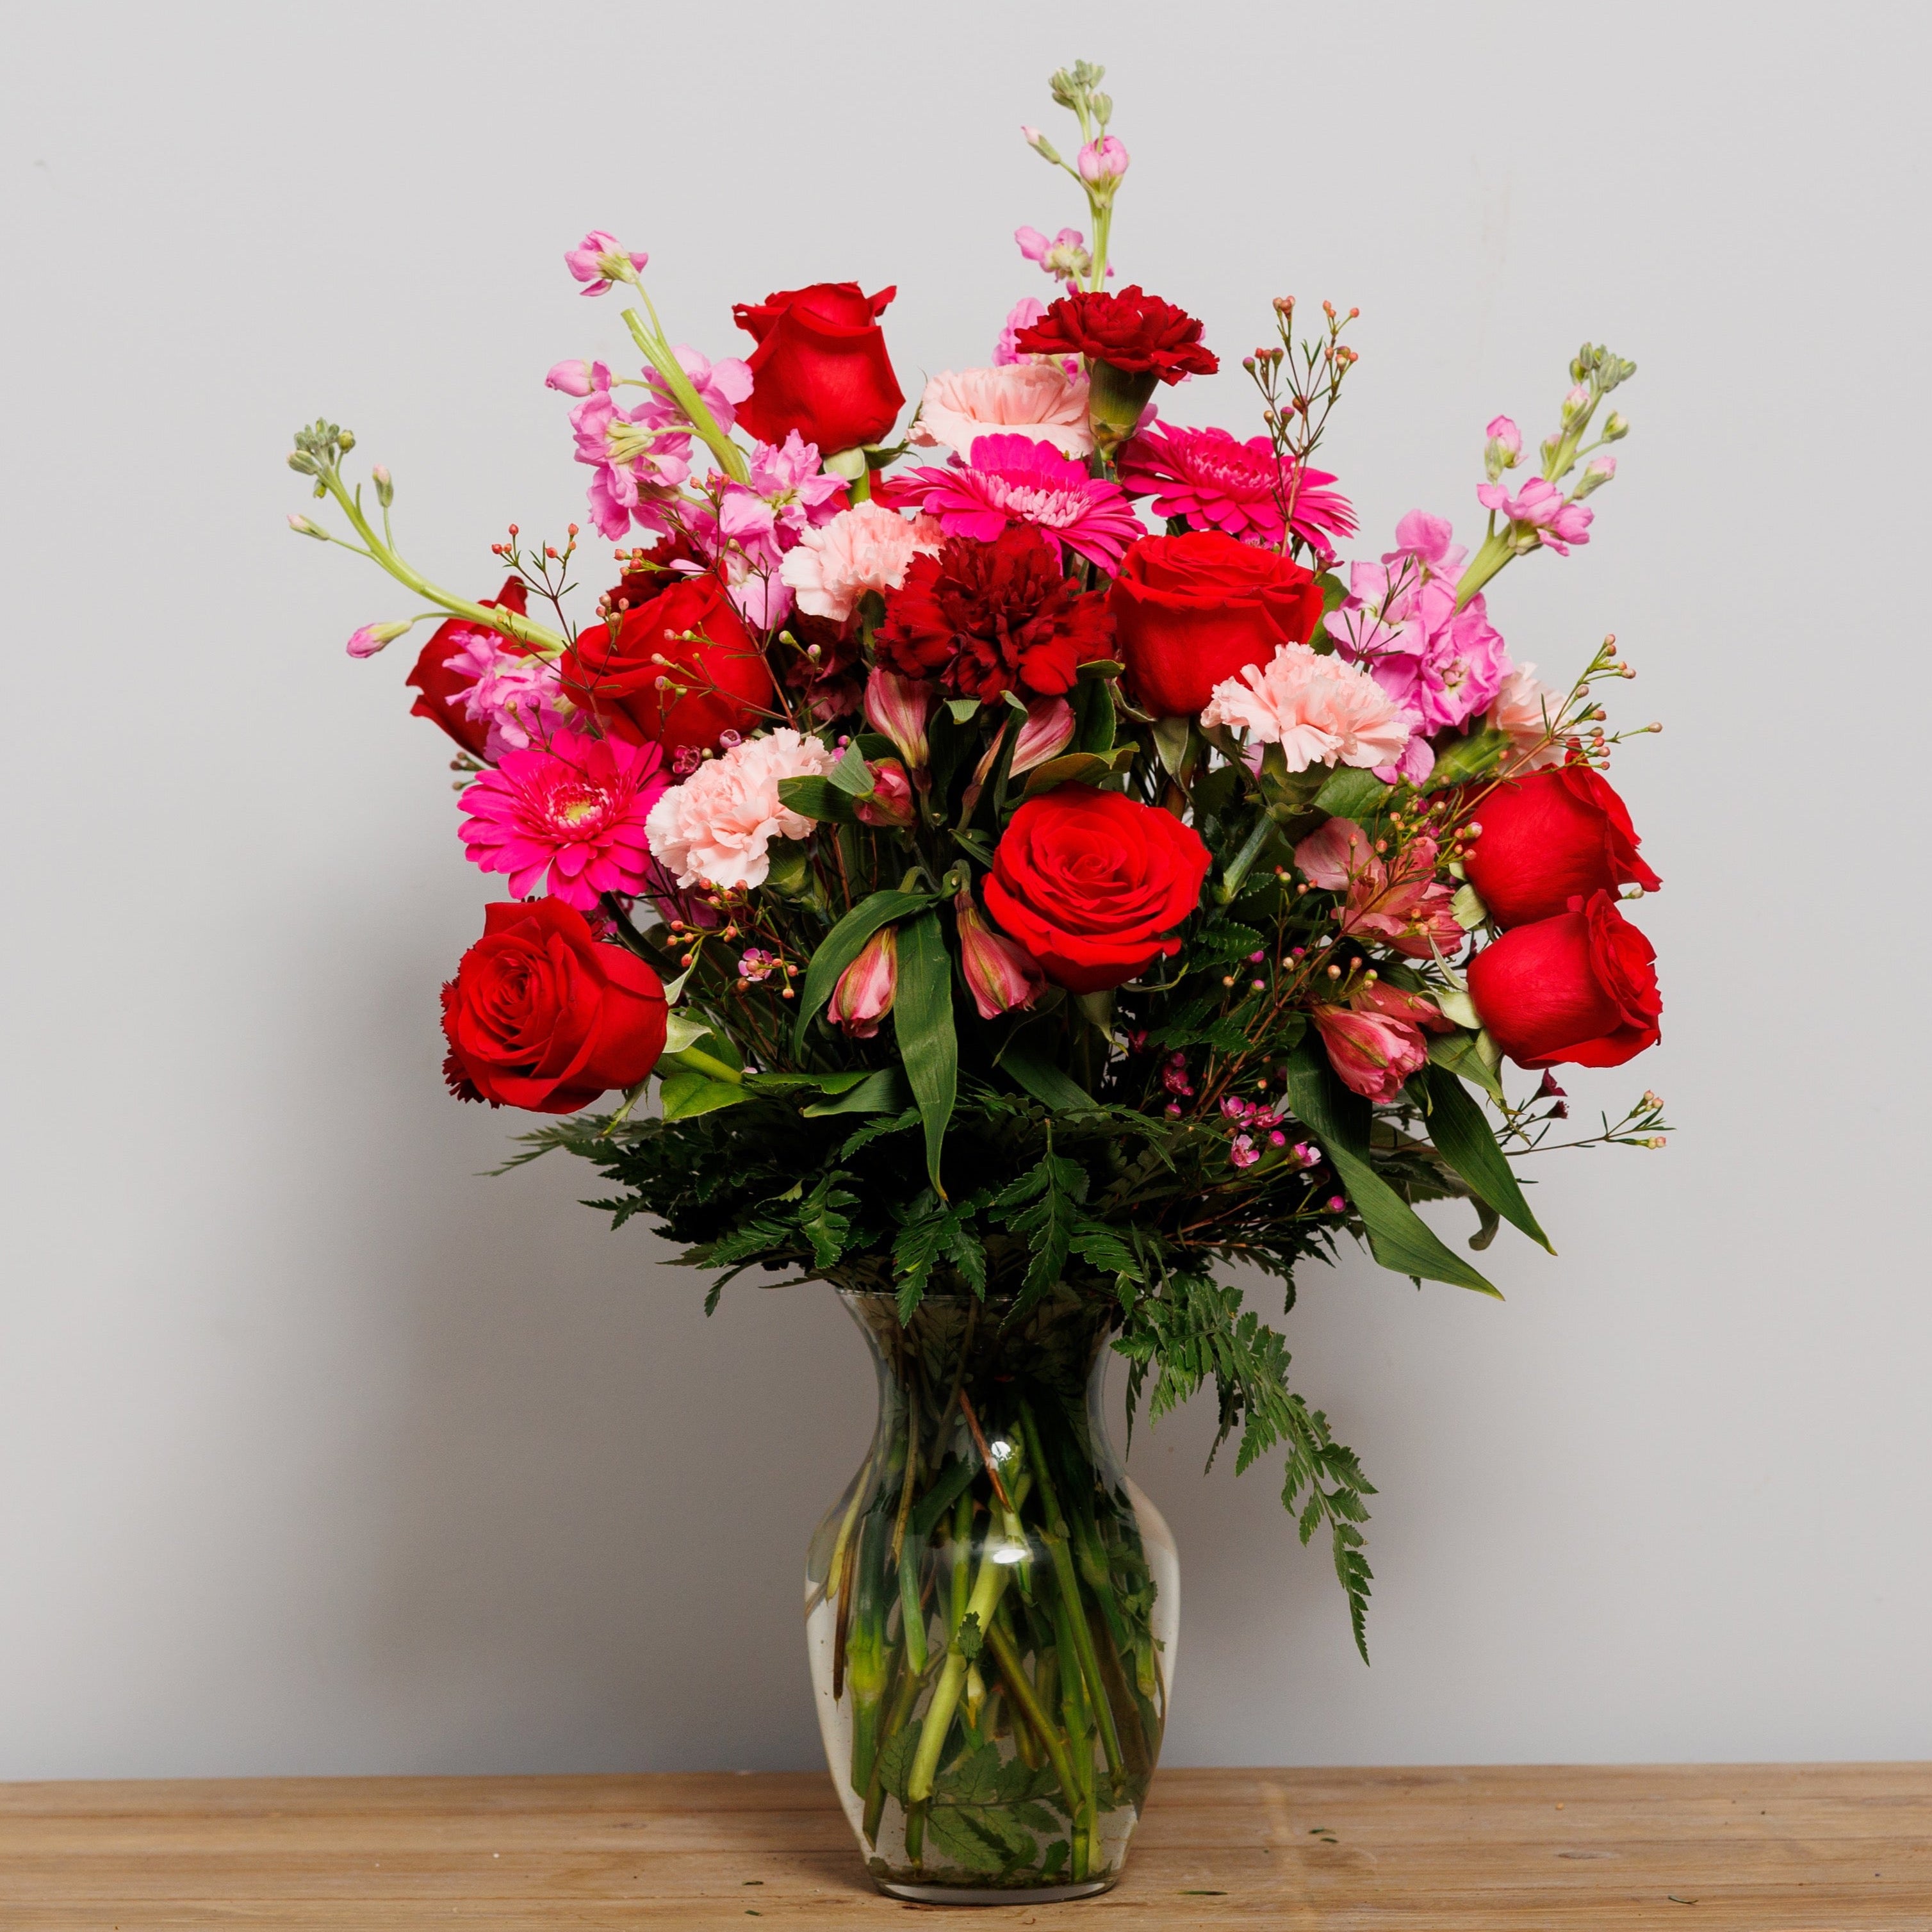 A vase arrangement with hot pink Gerber daisies, red roses and pink carnations.